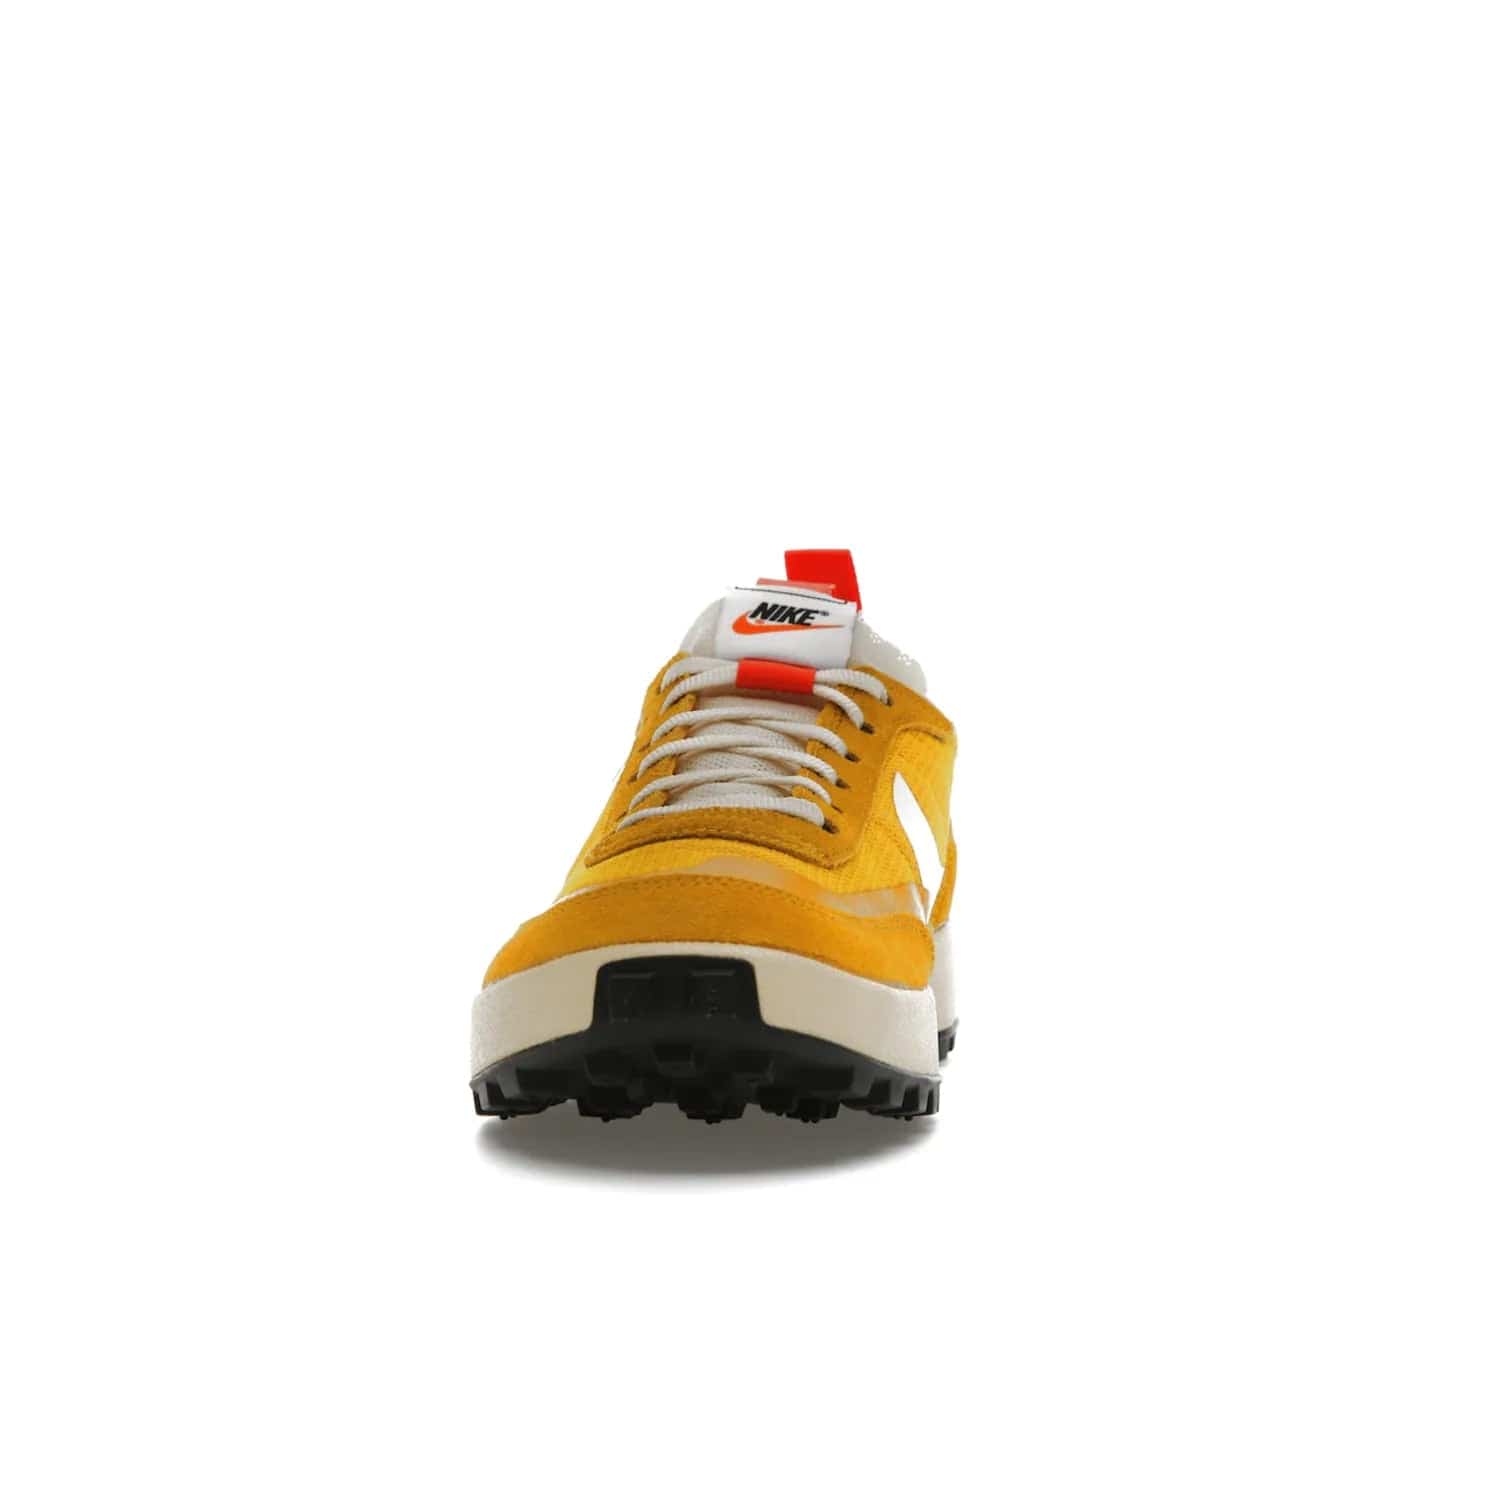 NikeCraft: General Purpose Shoe (Archive) – Tom Sachs Store